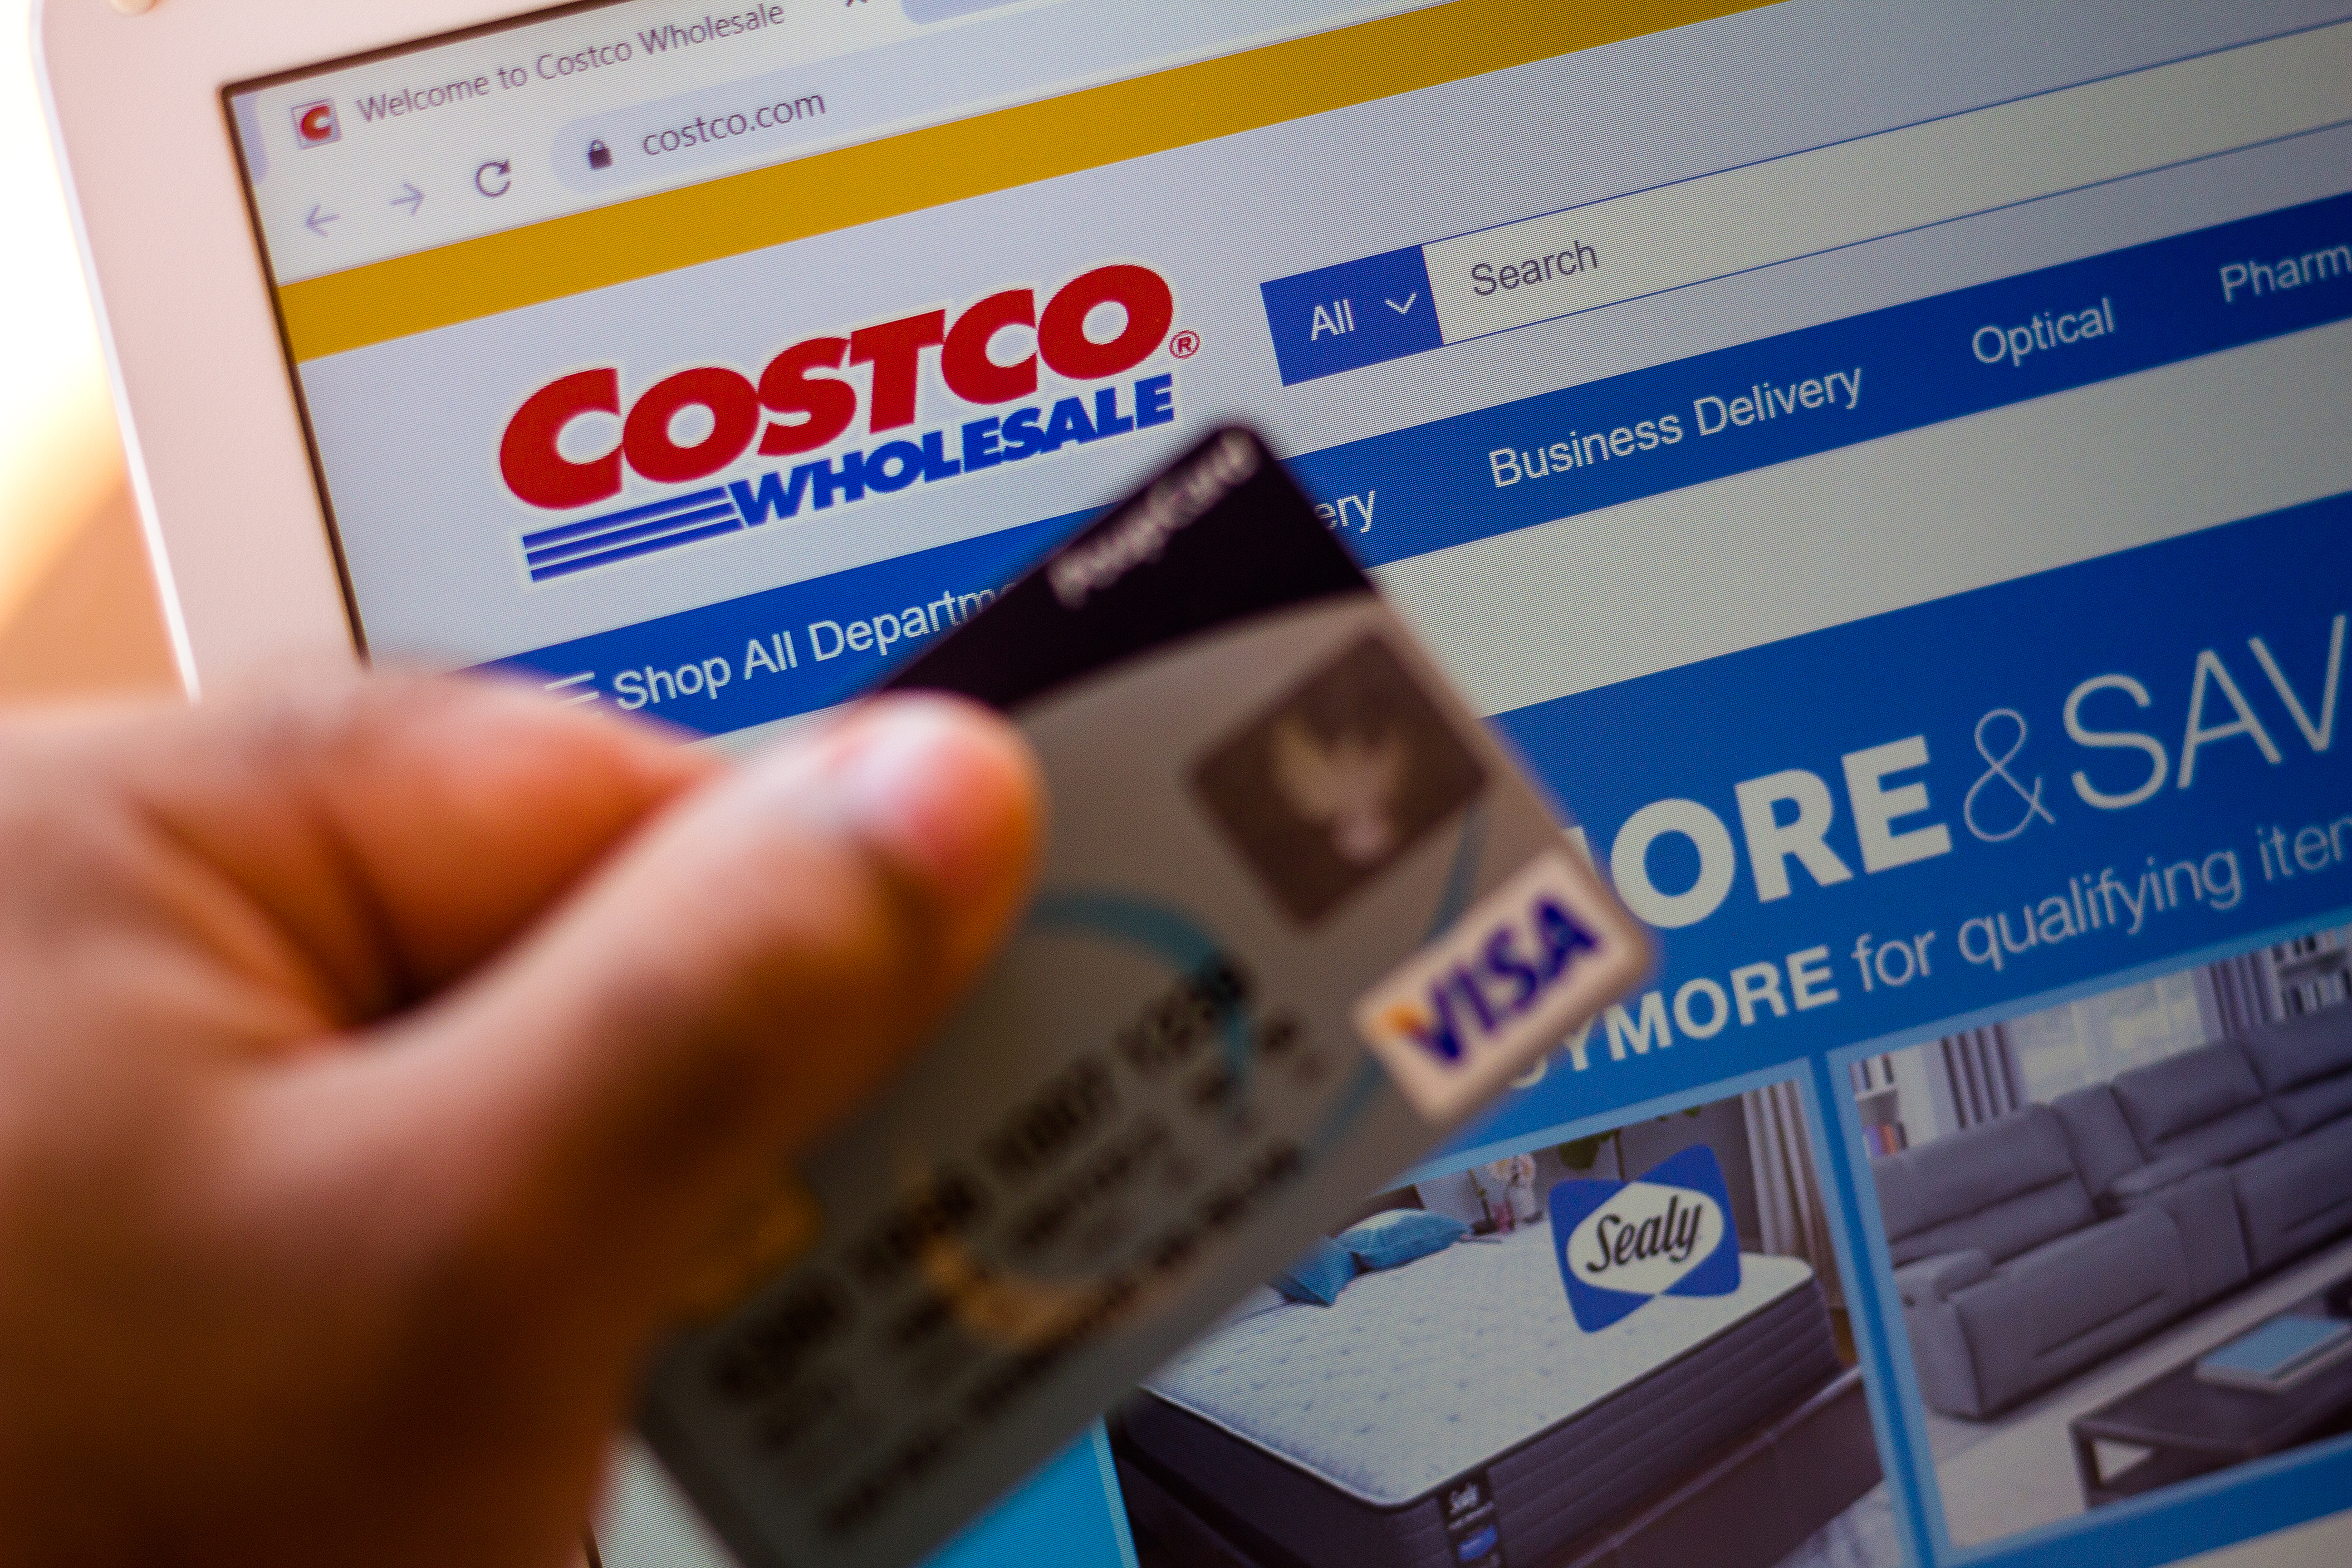 Costco credit cards: which ones can I apply for in the United States